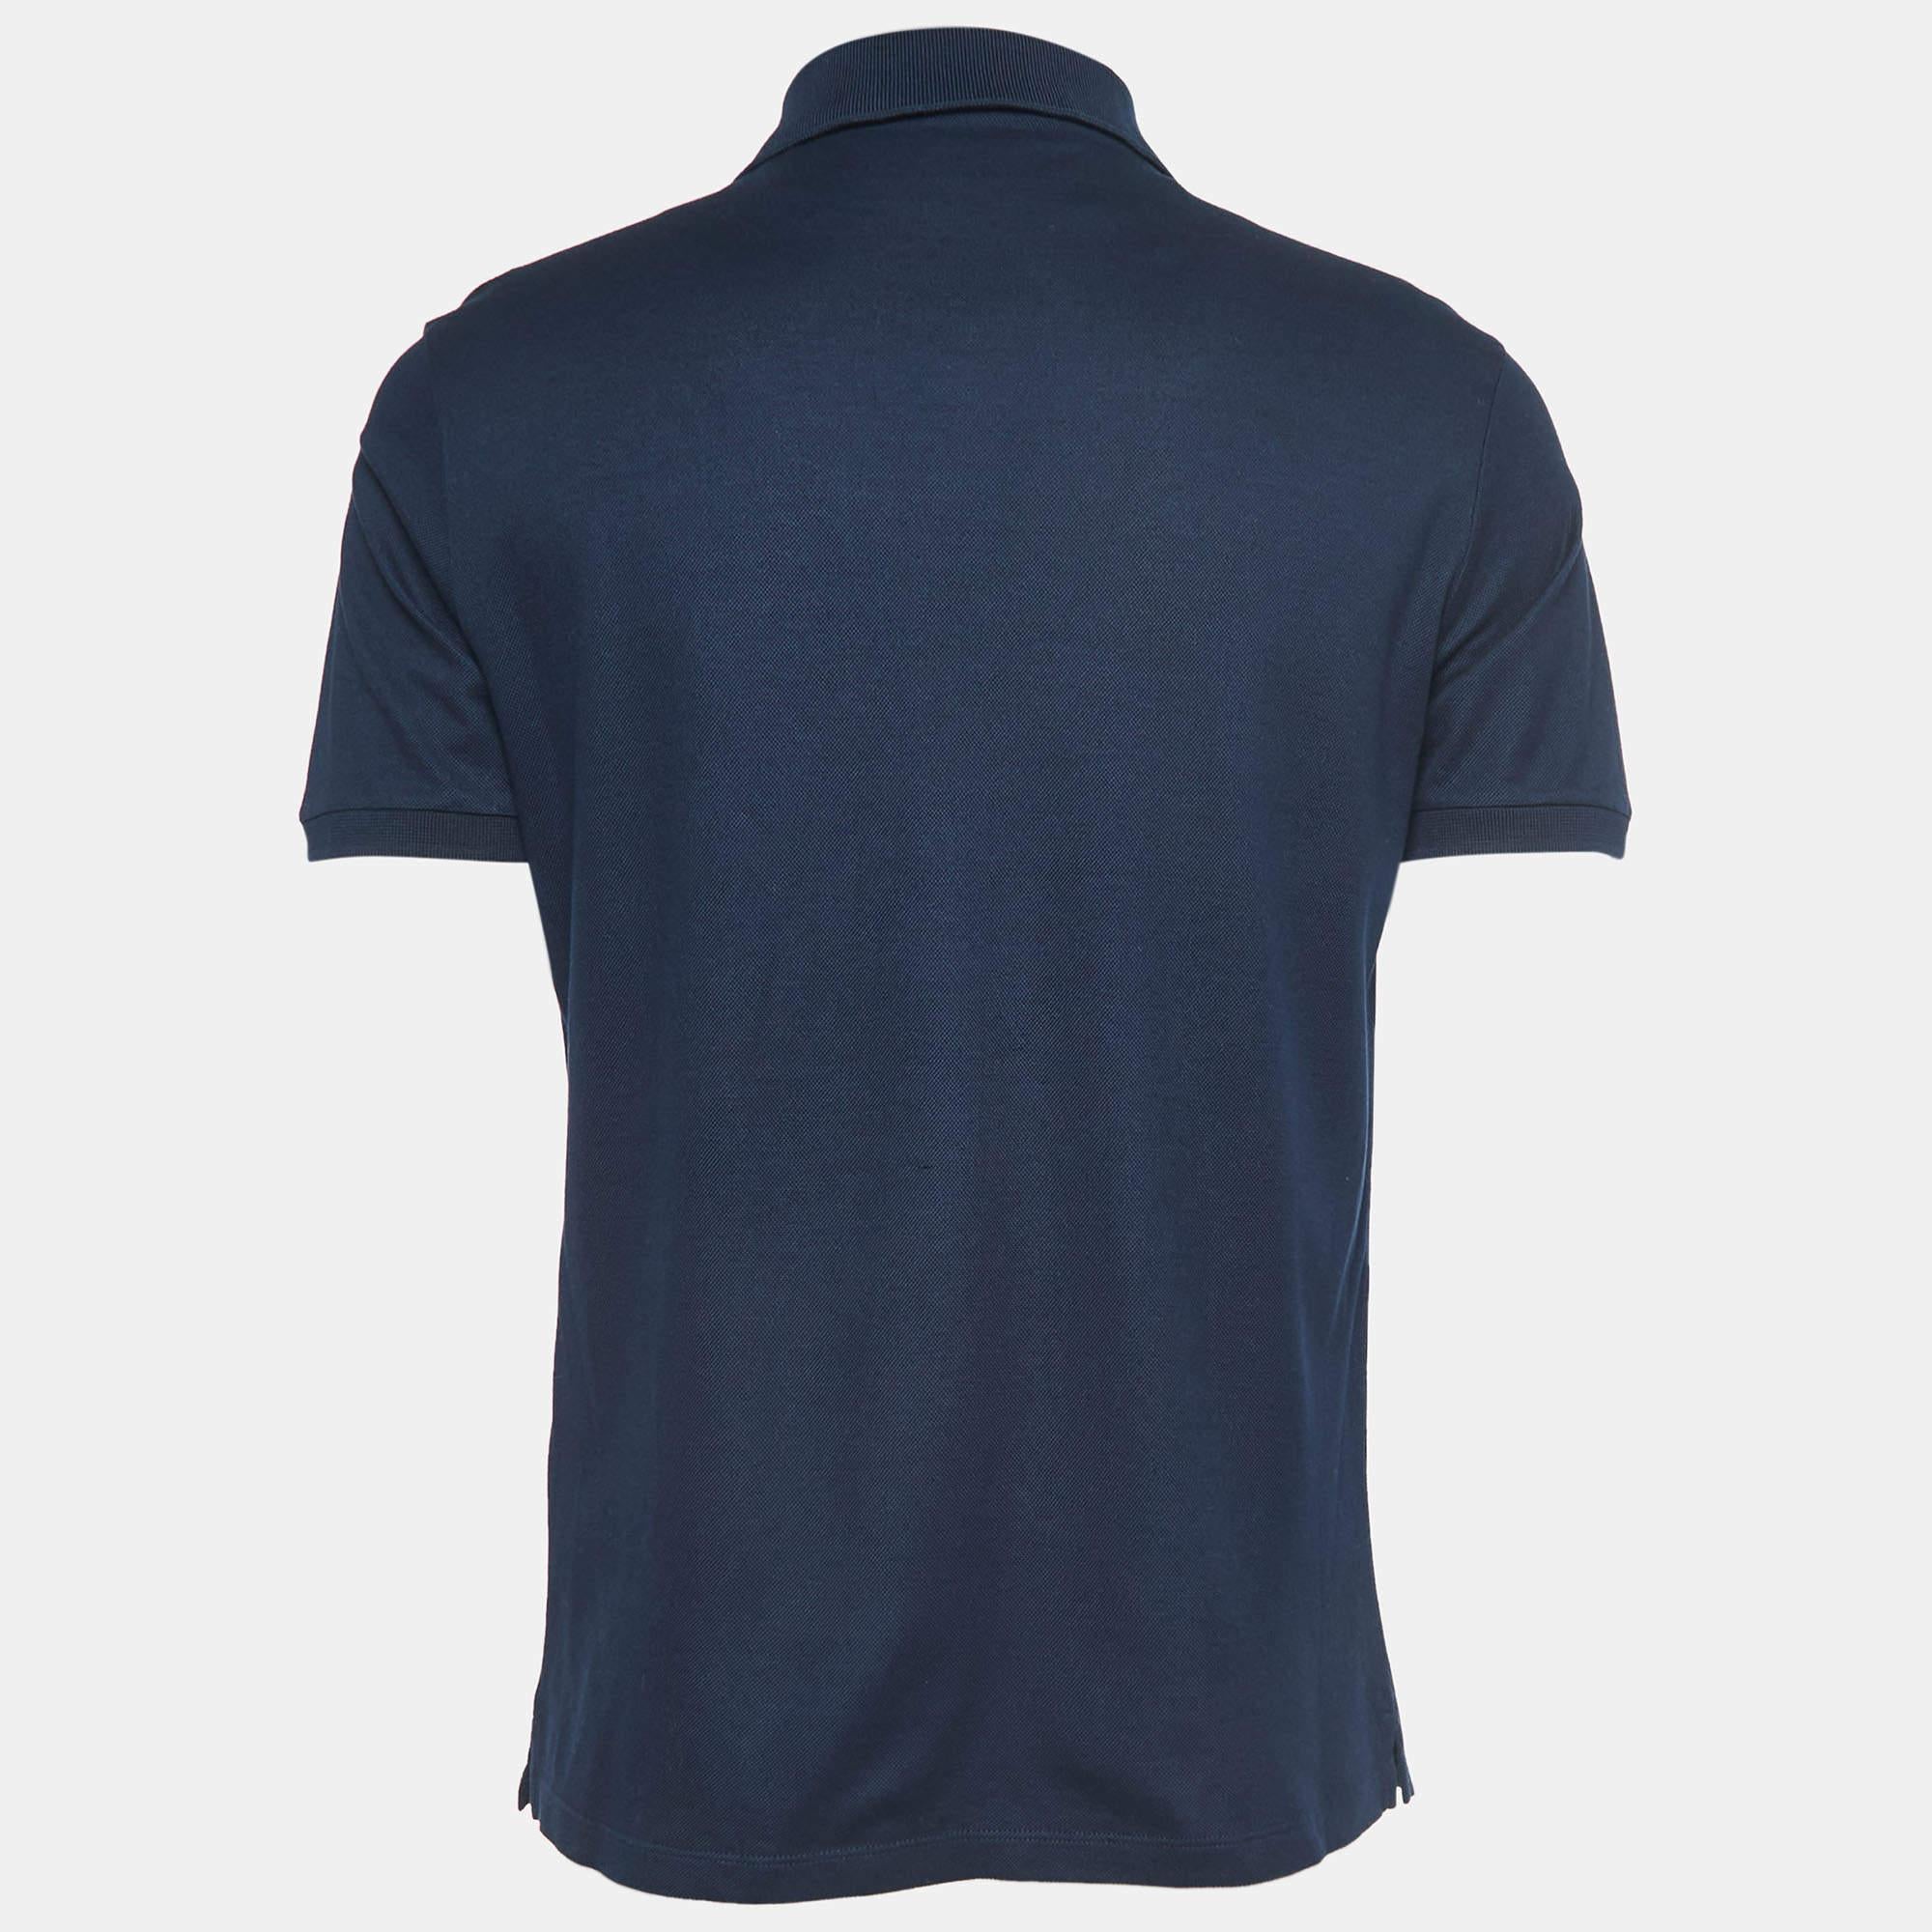 Elevate your everyday style with this meticulously crafted Polo T-shirt by Louis Vuitton. Impeccable tailoring ensures a perfect fit, while the breathable fabric offers unparalleled ease. The creation fuses fashion and comfort seamlessly.

